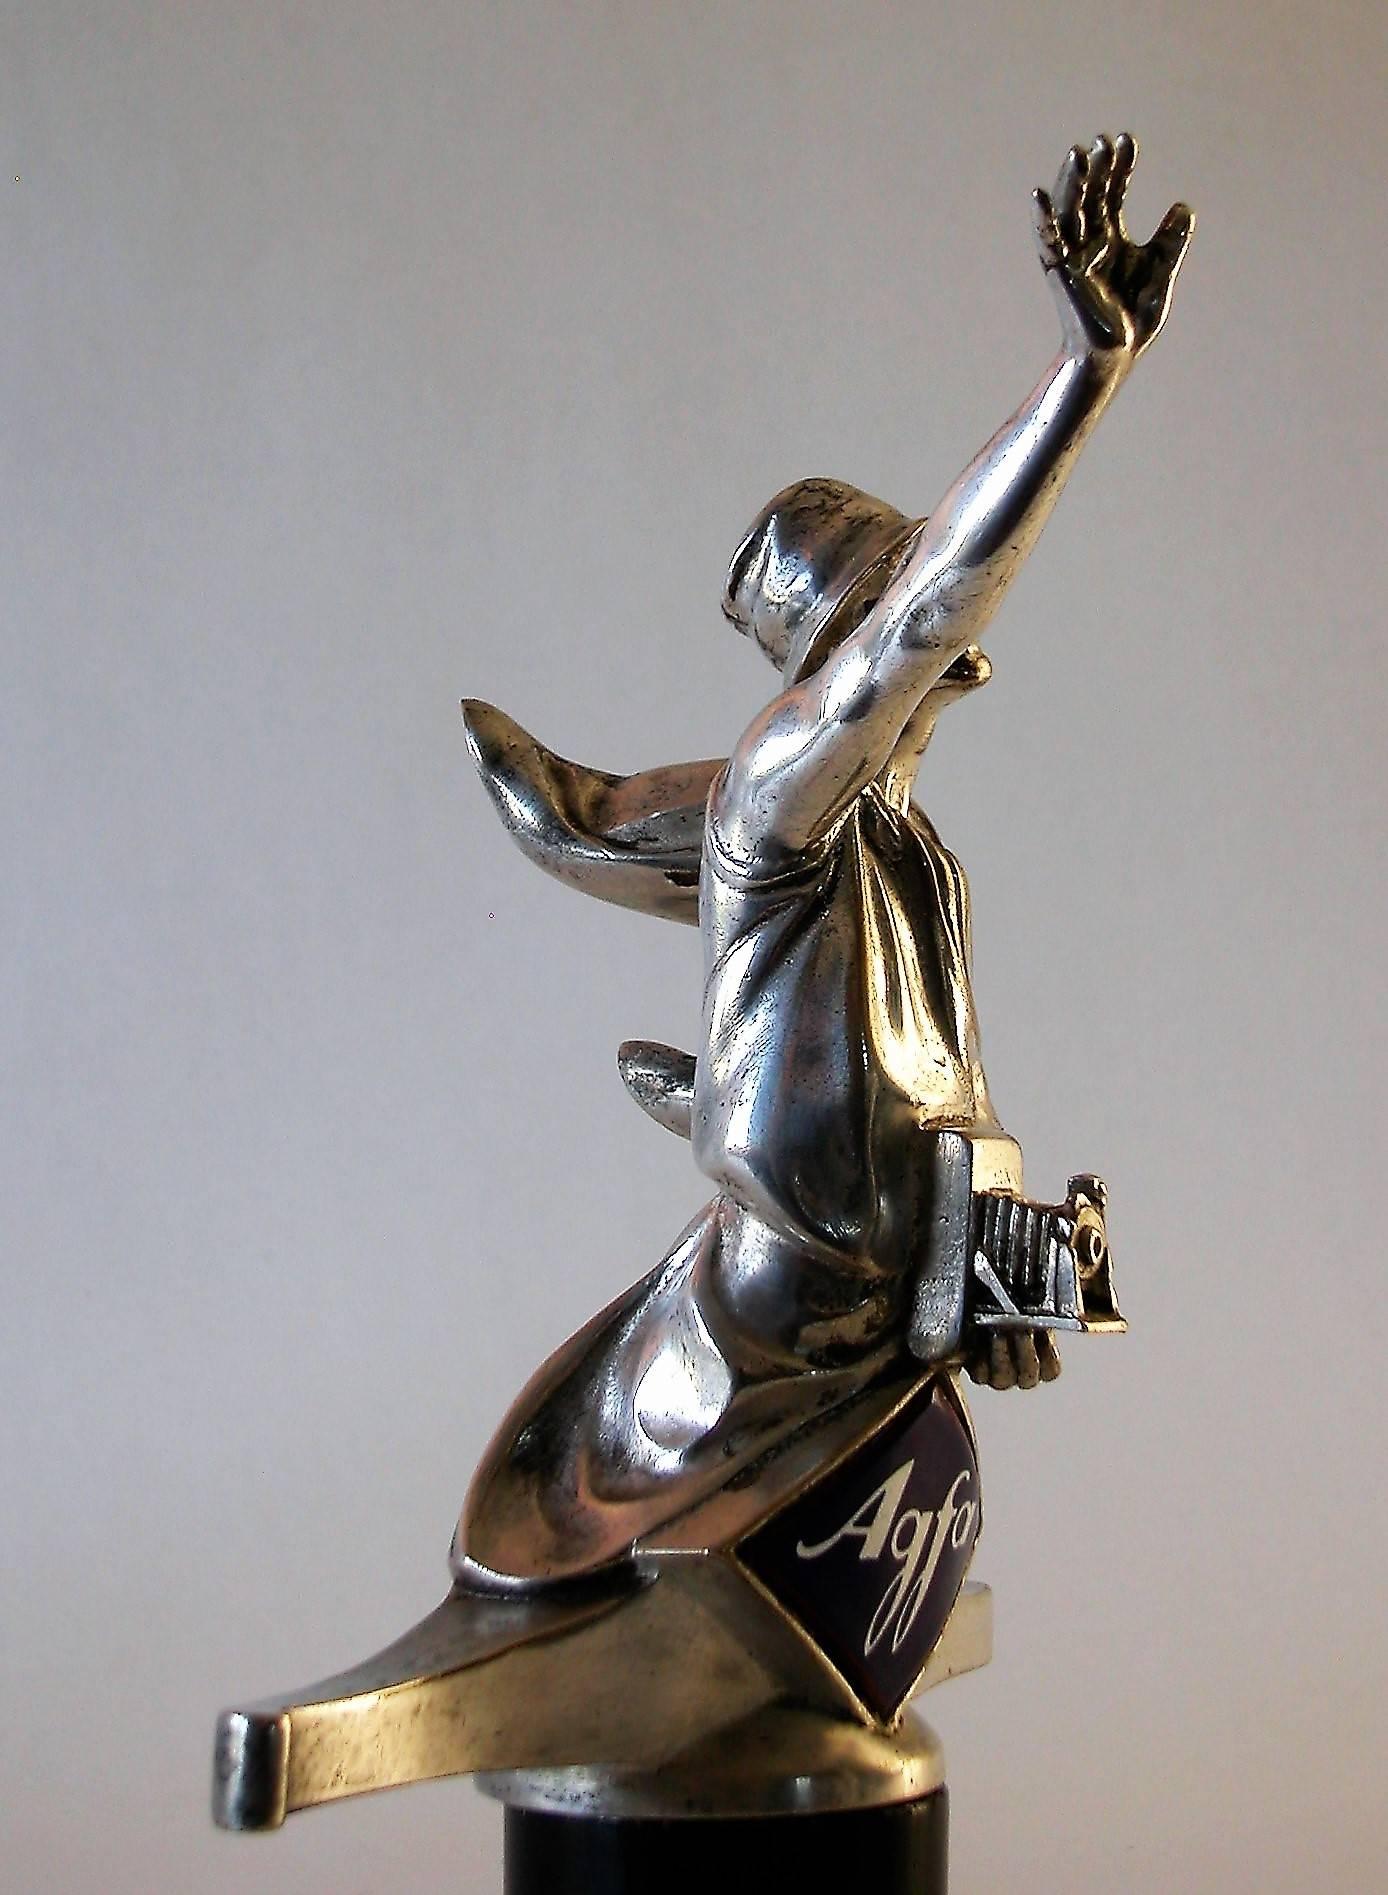 One of the most rare car mascots (hood ornament) in the world, made for AGFA in the roaring 1920s.
 
This AGFA lady is silvered (nor chromed nor nickeled) and the design is based upon an AGFA film poster from Marcello Dudovich from 1922.
AGFA had